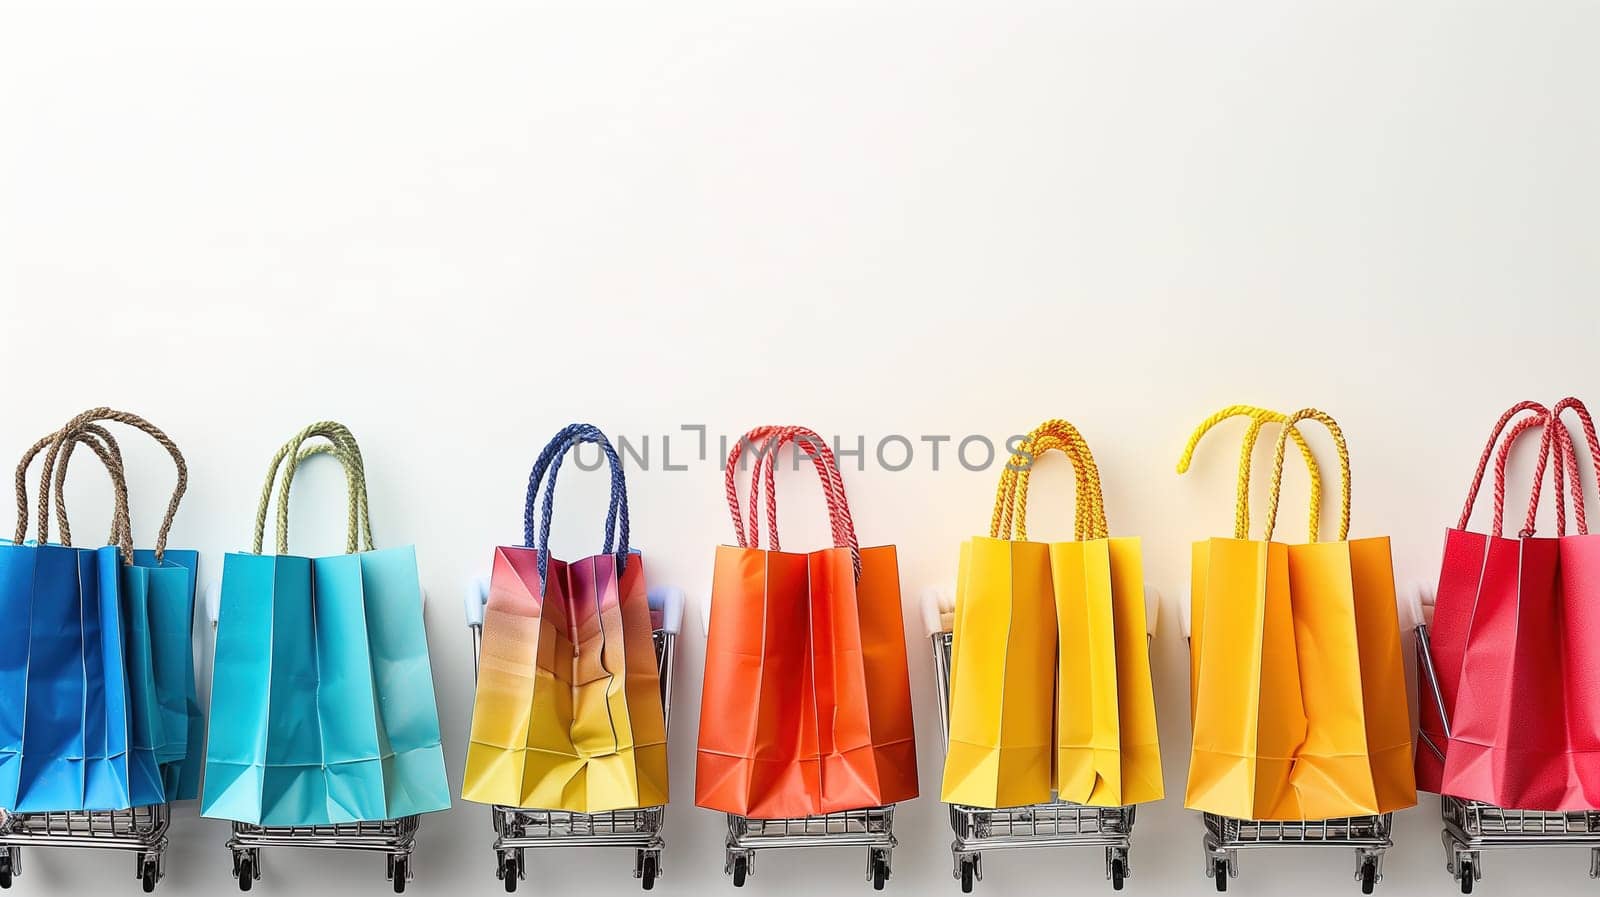 Several shopping bags lined up neatly on a store rack, symbolizing a sale event like Black Friday. The bags are of various colors and sizes, ready for customers to take home.